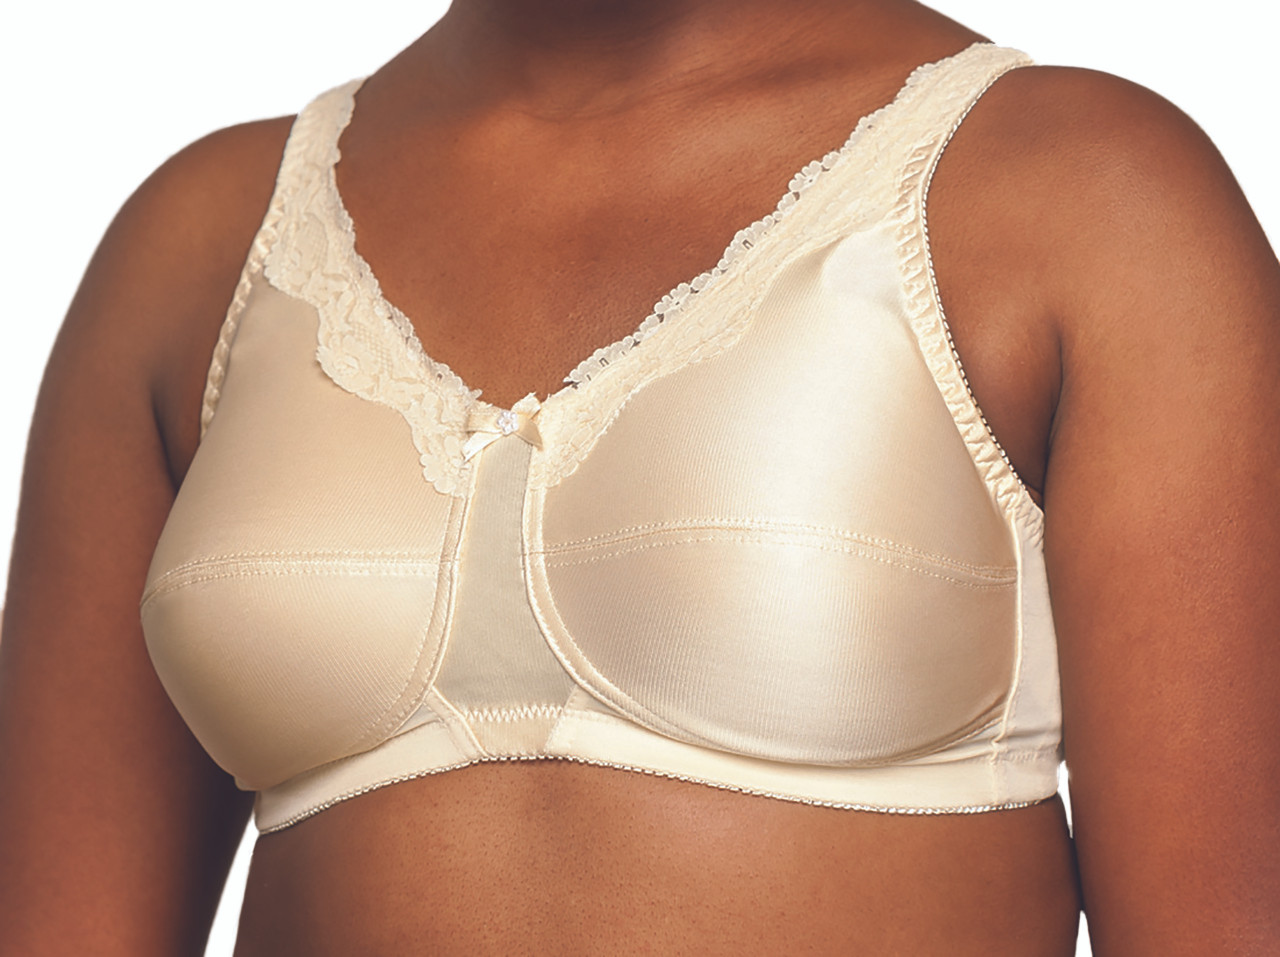 Jodee Mastectomy Bras - You'll feel fantastic in our Fantasia Bra with its  beautiful lace detailing and elegantly embossed tricot cups. 💕 This style  also features pockets that can hold a breast